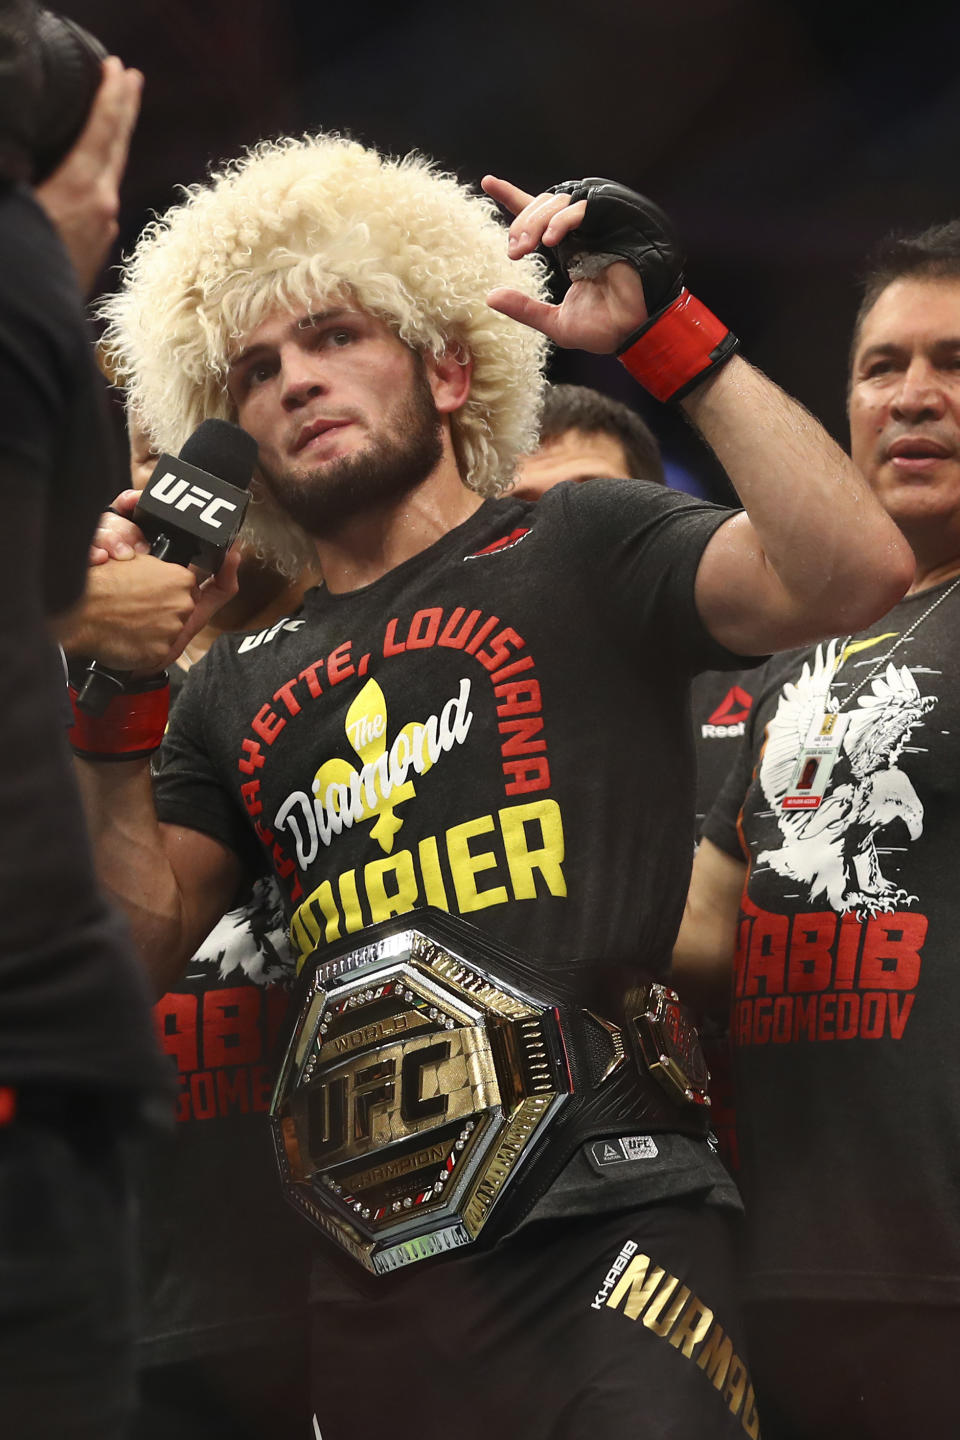 Russian UFC fighter Khabib Nurmagomedov speaks after wining against UFC fighter Dustin Poirier, of Lafayette, La., during Lightweight title mixed martial arts bout at UFC 242, in Yas Mall in Abu Dhabi, United Arab Emirates, Saturday , Sept.7 2019. (AP Photo/ Mahmoud Khaled)